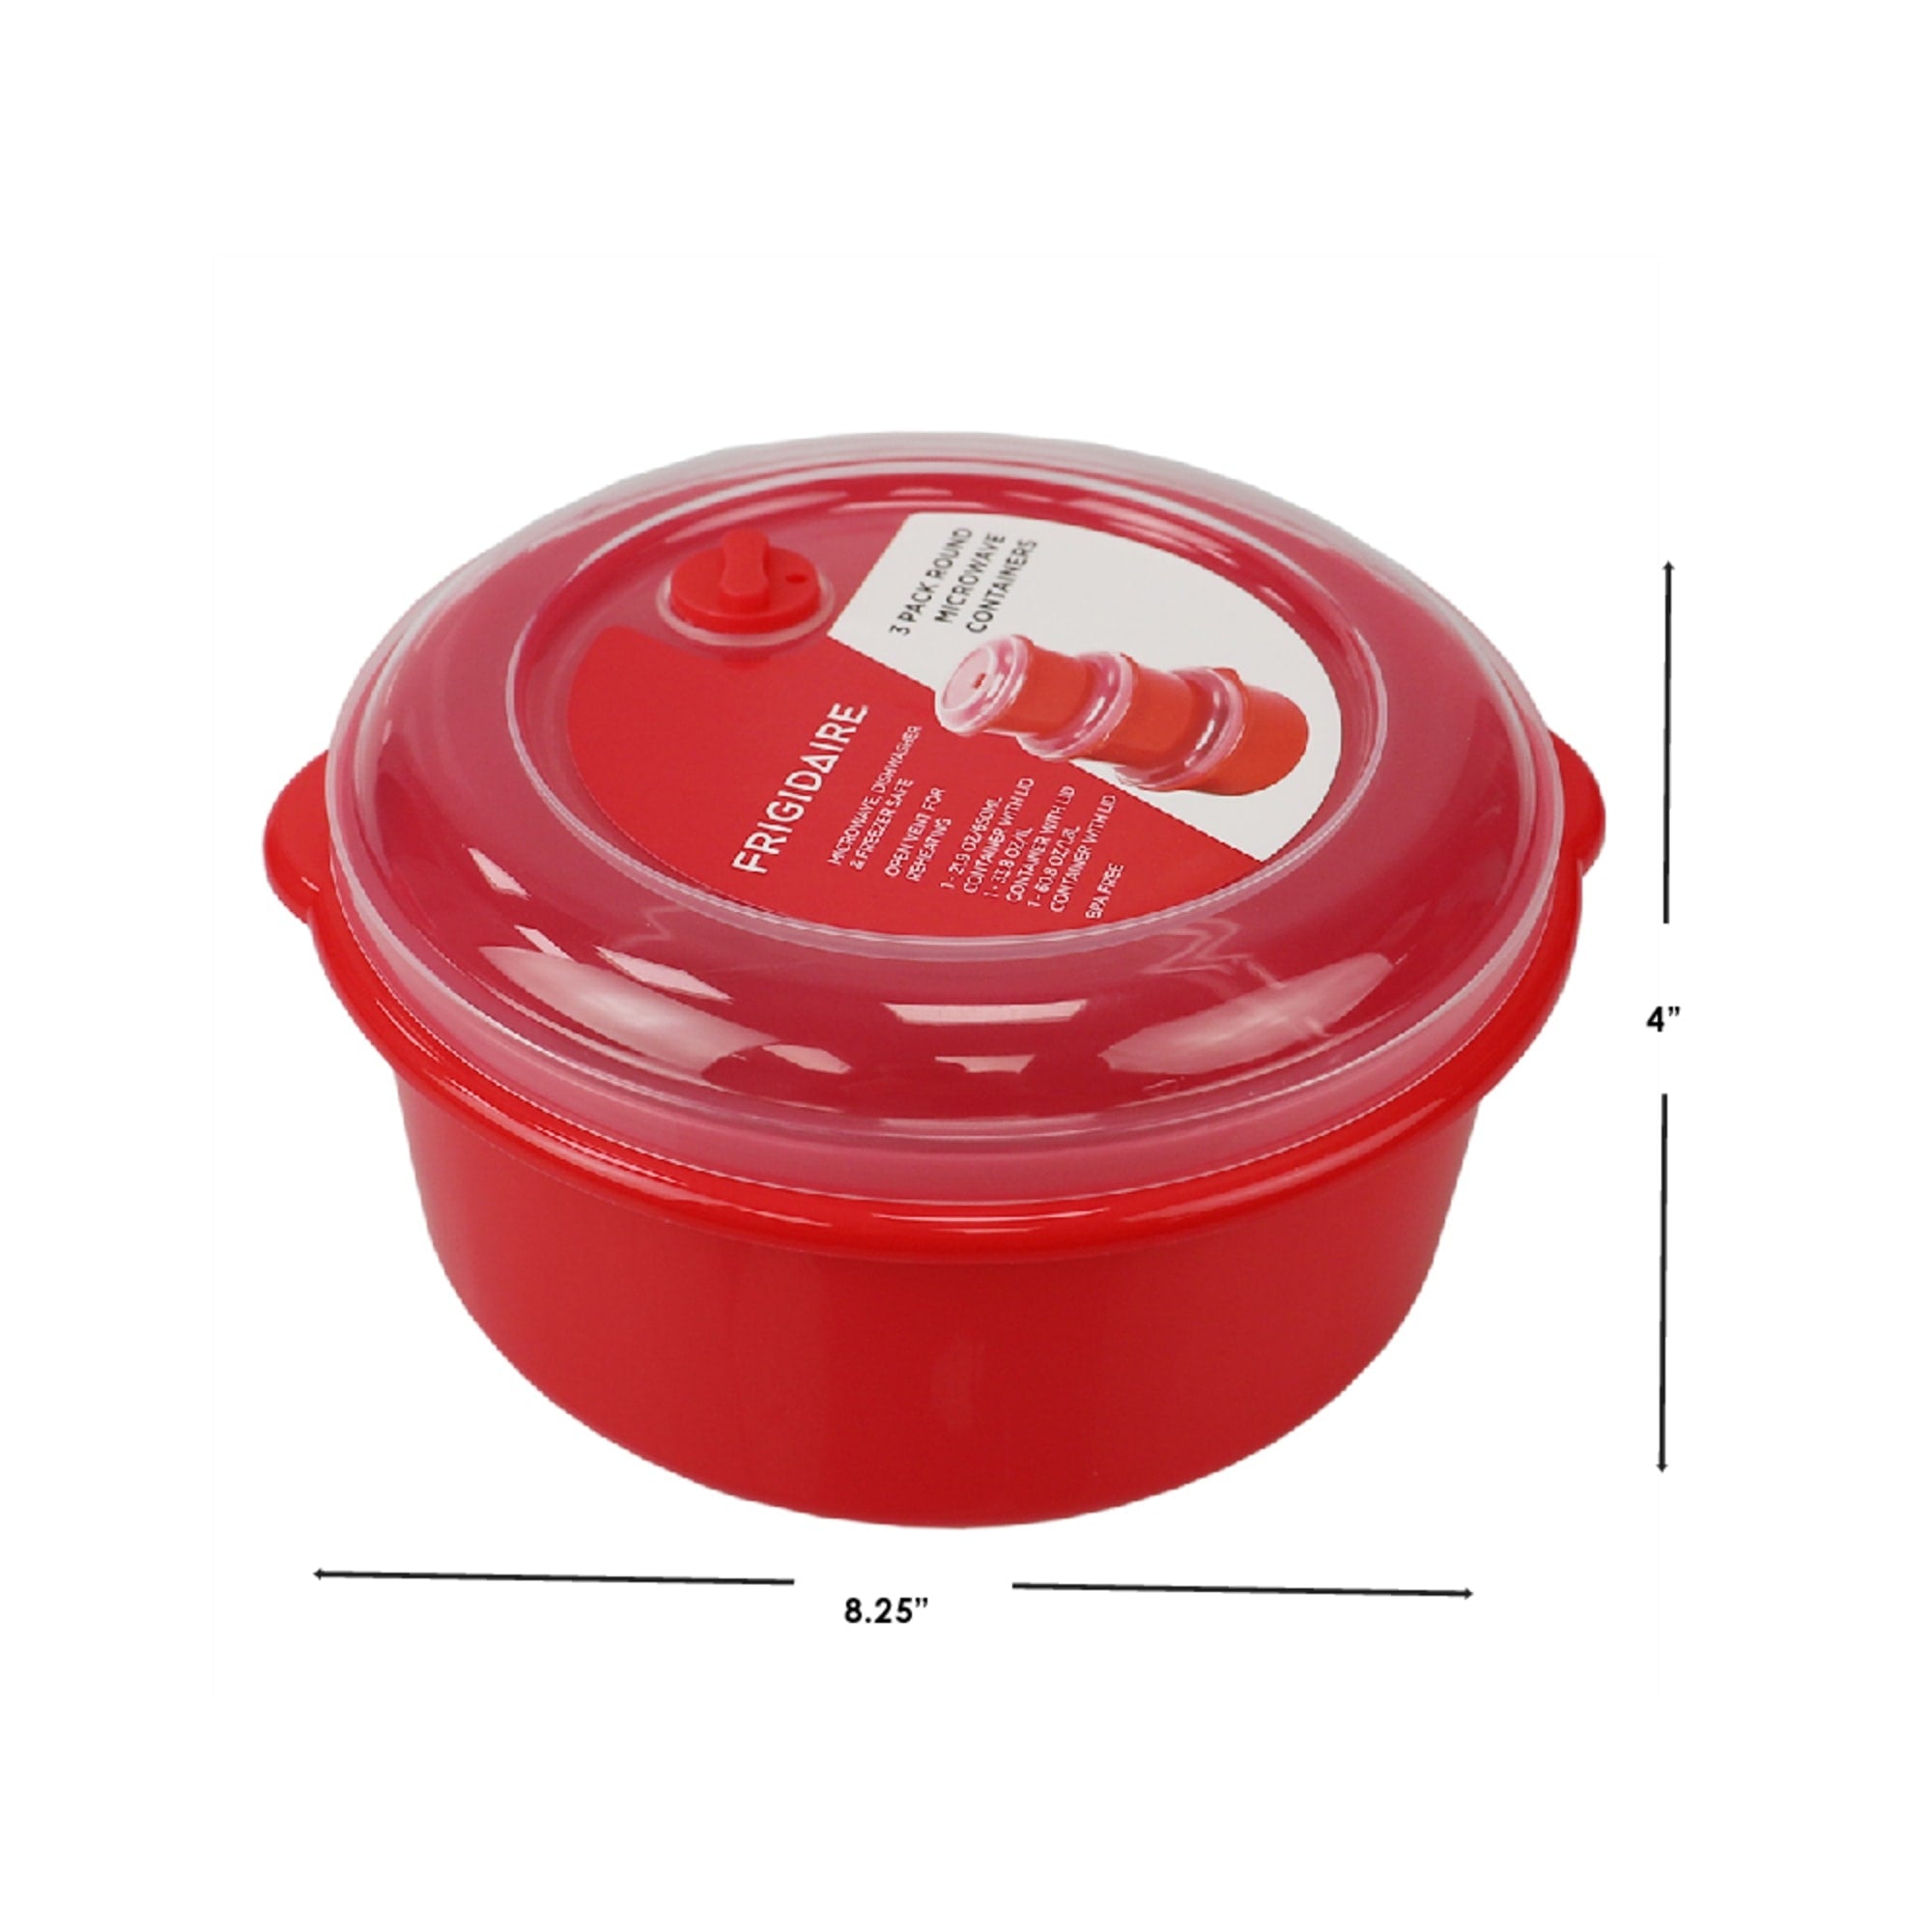 Home Basics 16 oz. Round Glass Food Storage Container with Red Lid